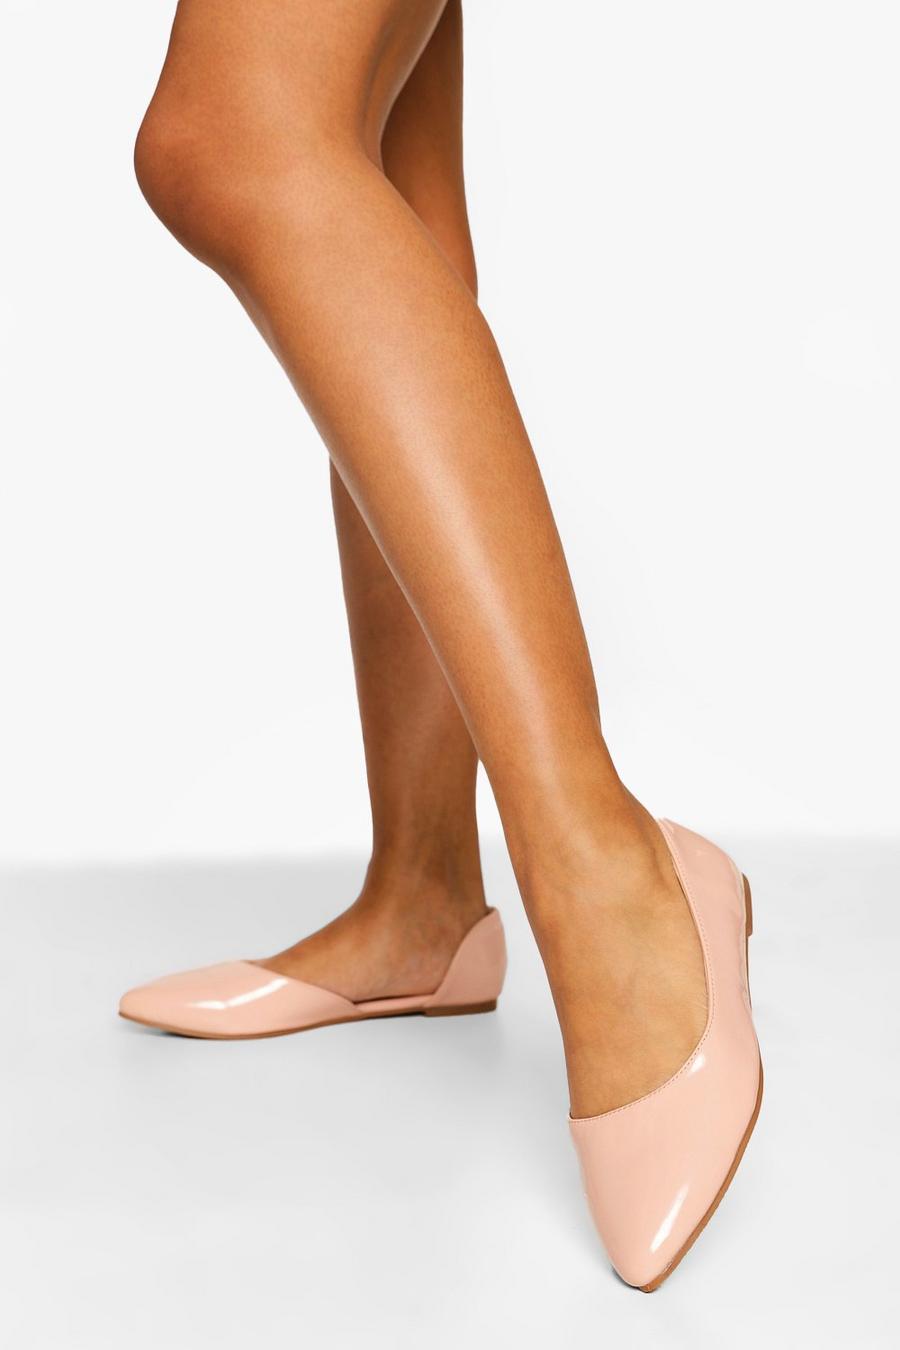 Scarpe piatte a punta con cut-out laterale, Nude image number 1